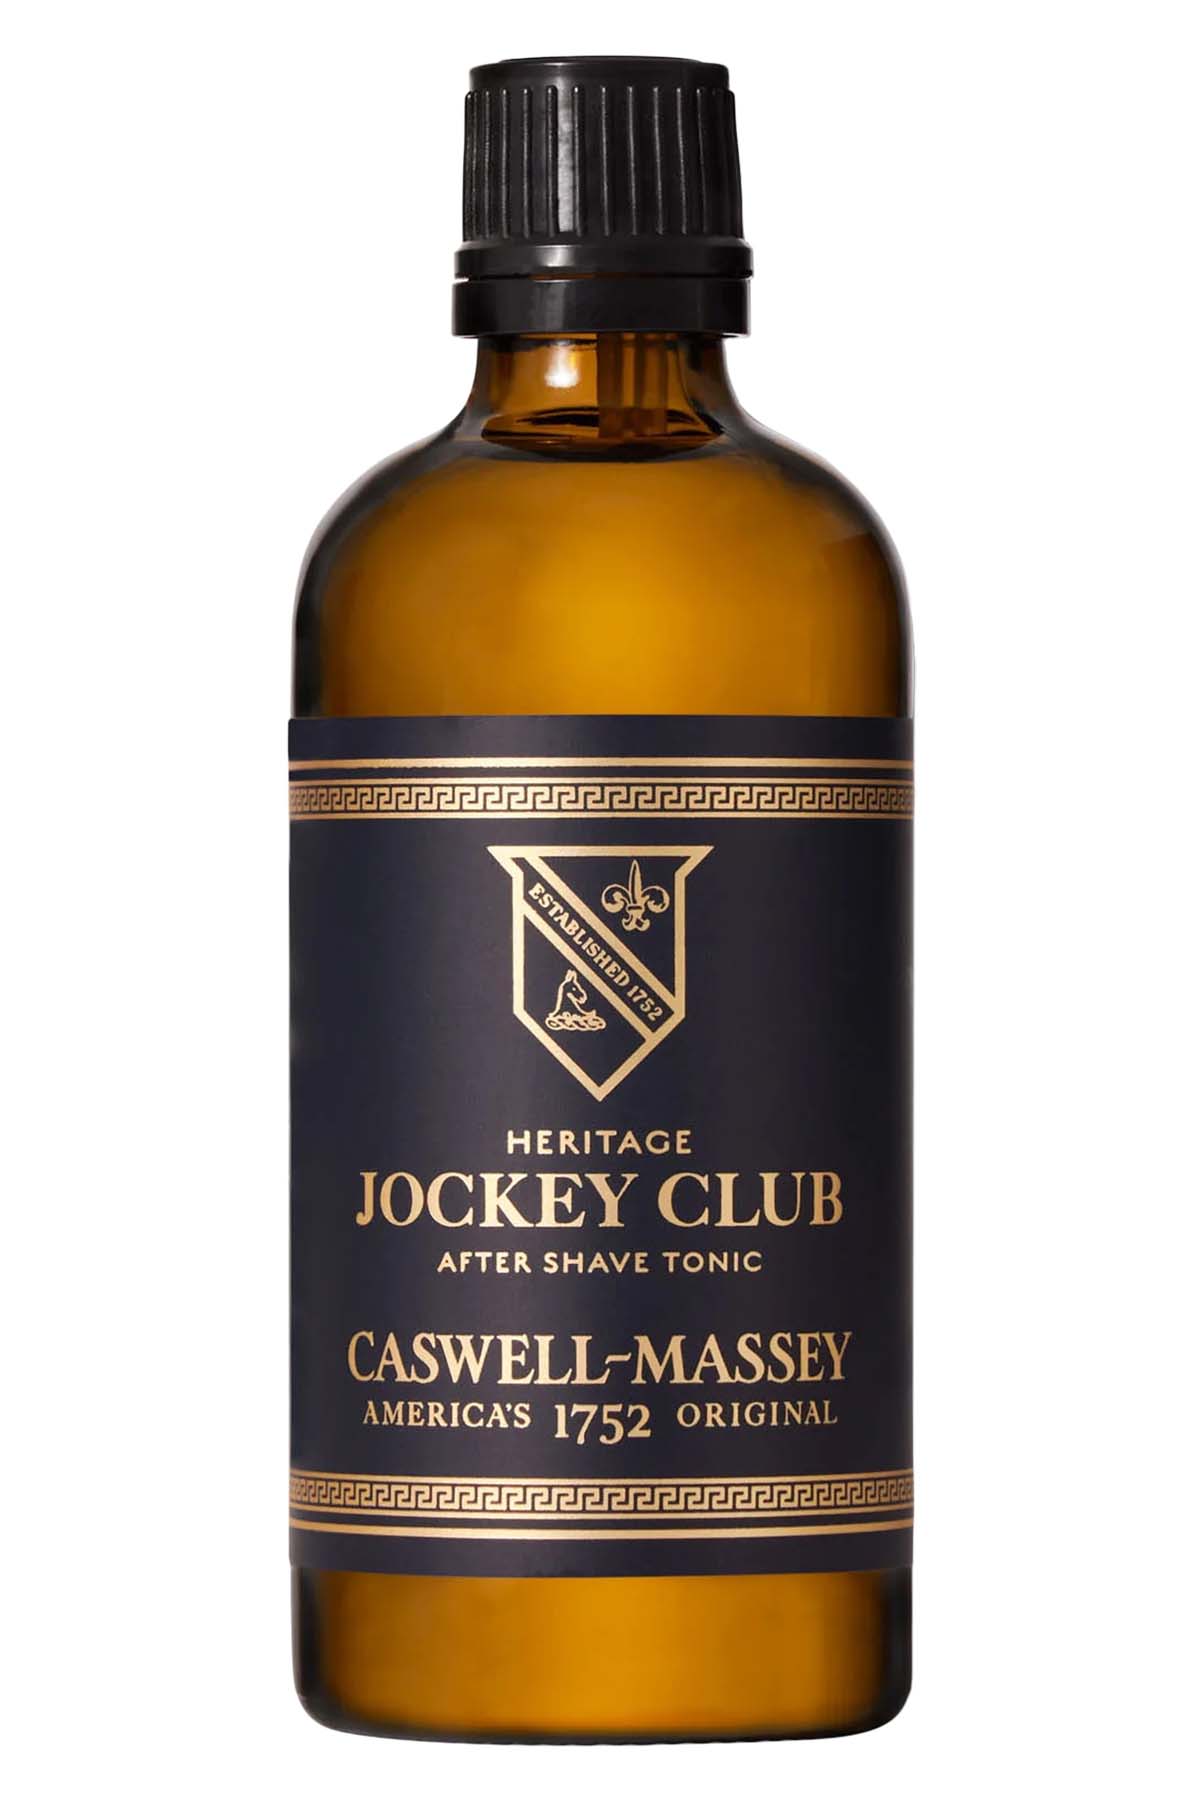 Caswell Massey Jockey Club After Shave Tonic